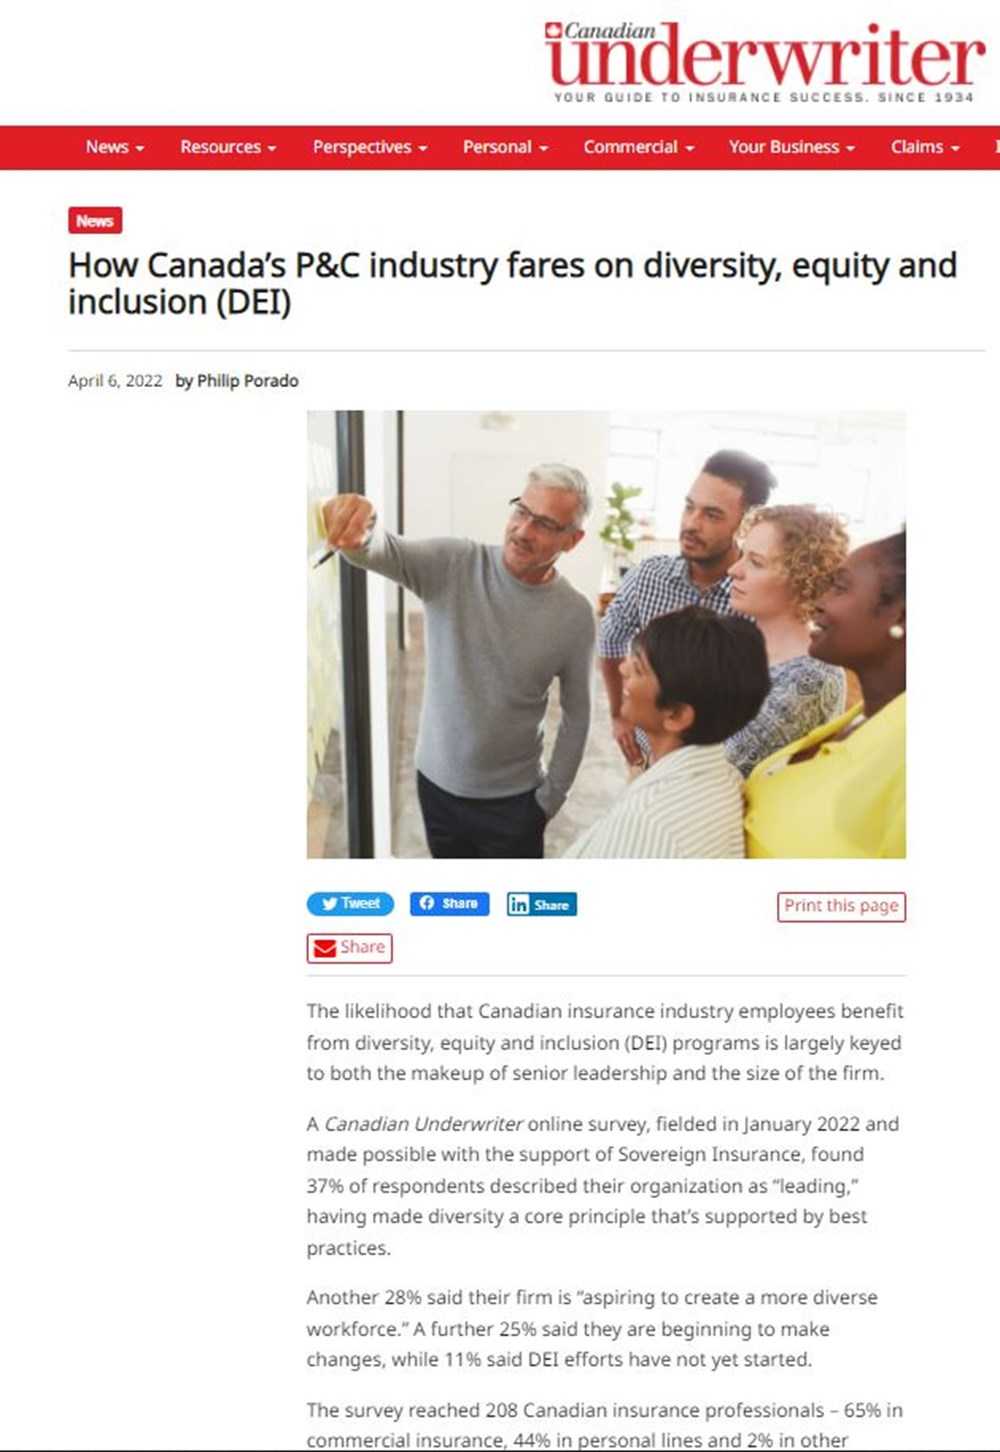 Screenshot of an article in "Canadian Underwriter" magazine "How Canada's PC Industry fares on DEI"